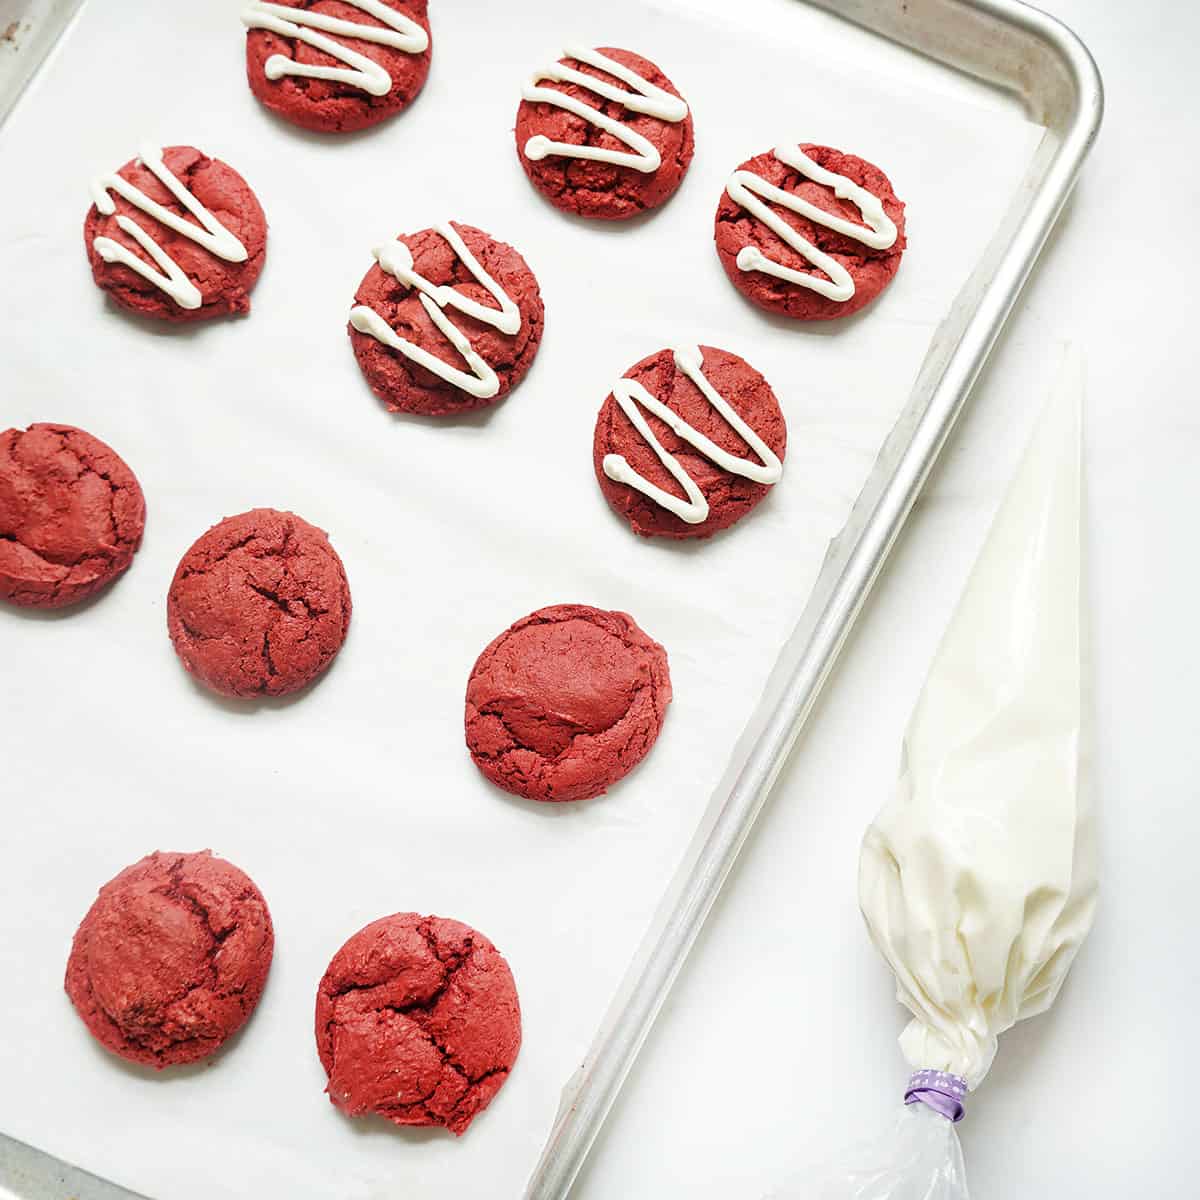 icing red velvet cake mix cookies with cream cheese frosting